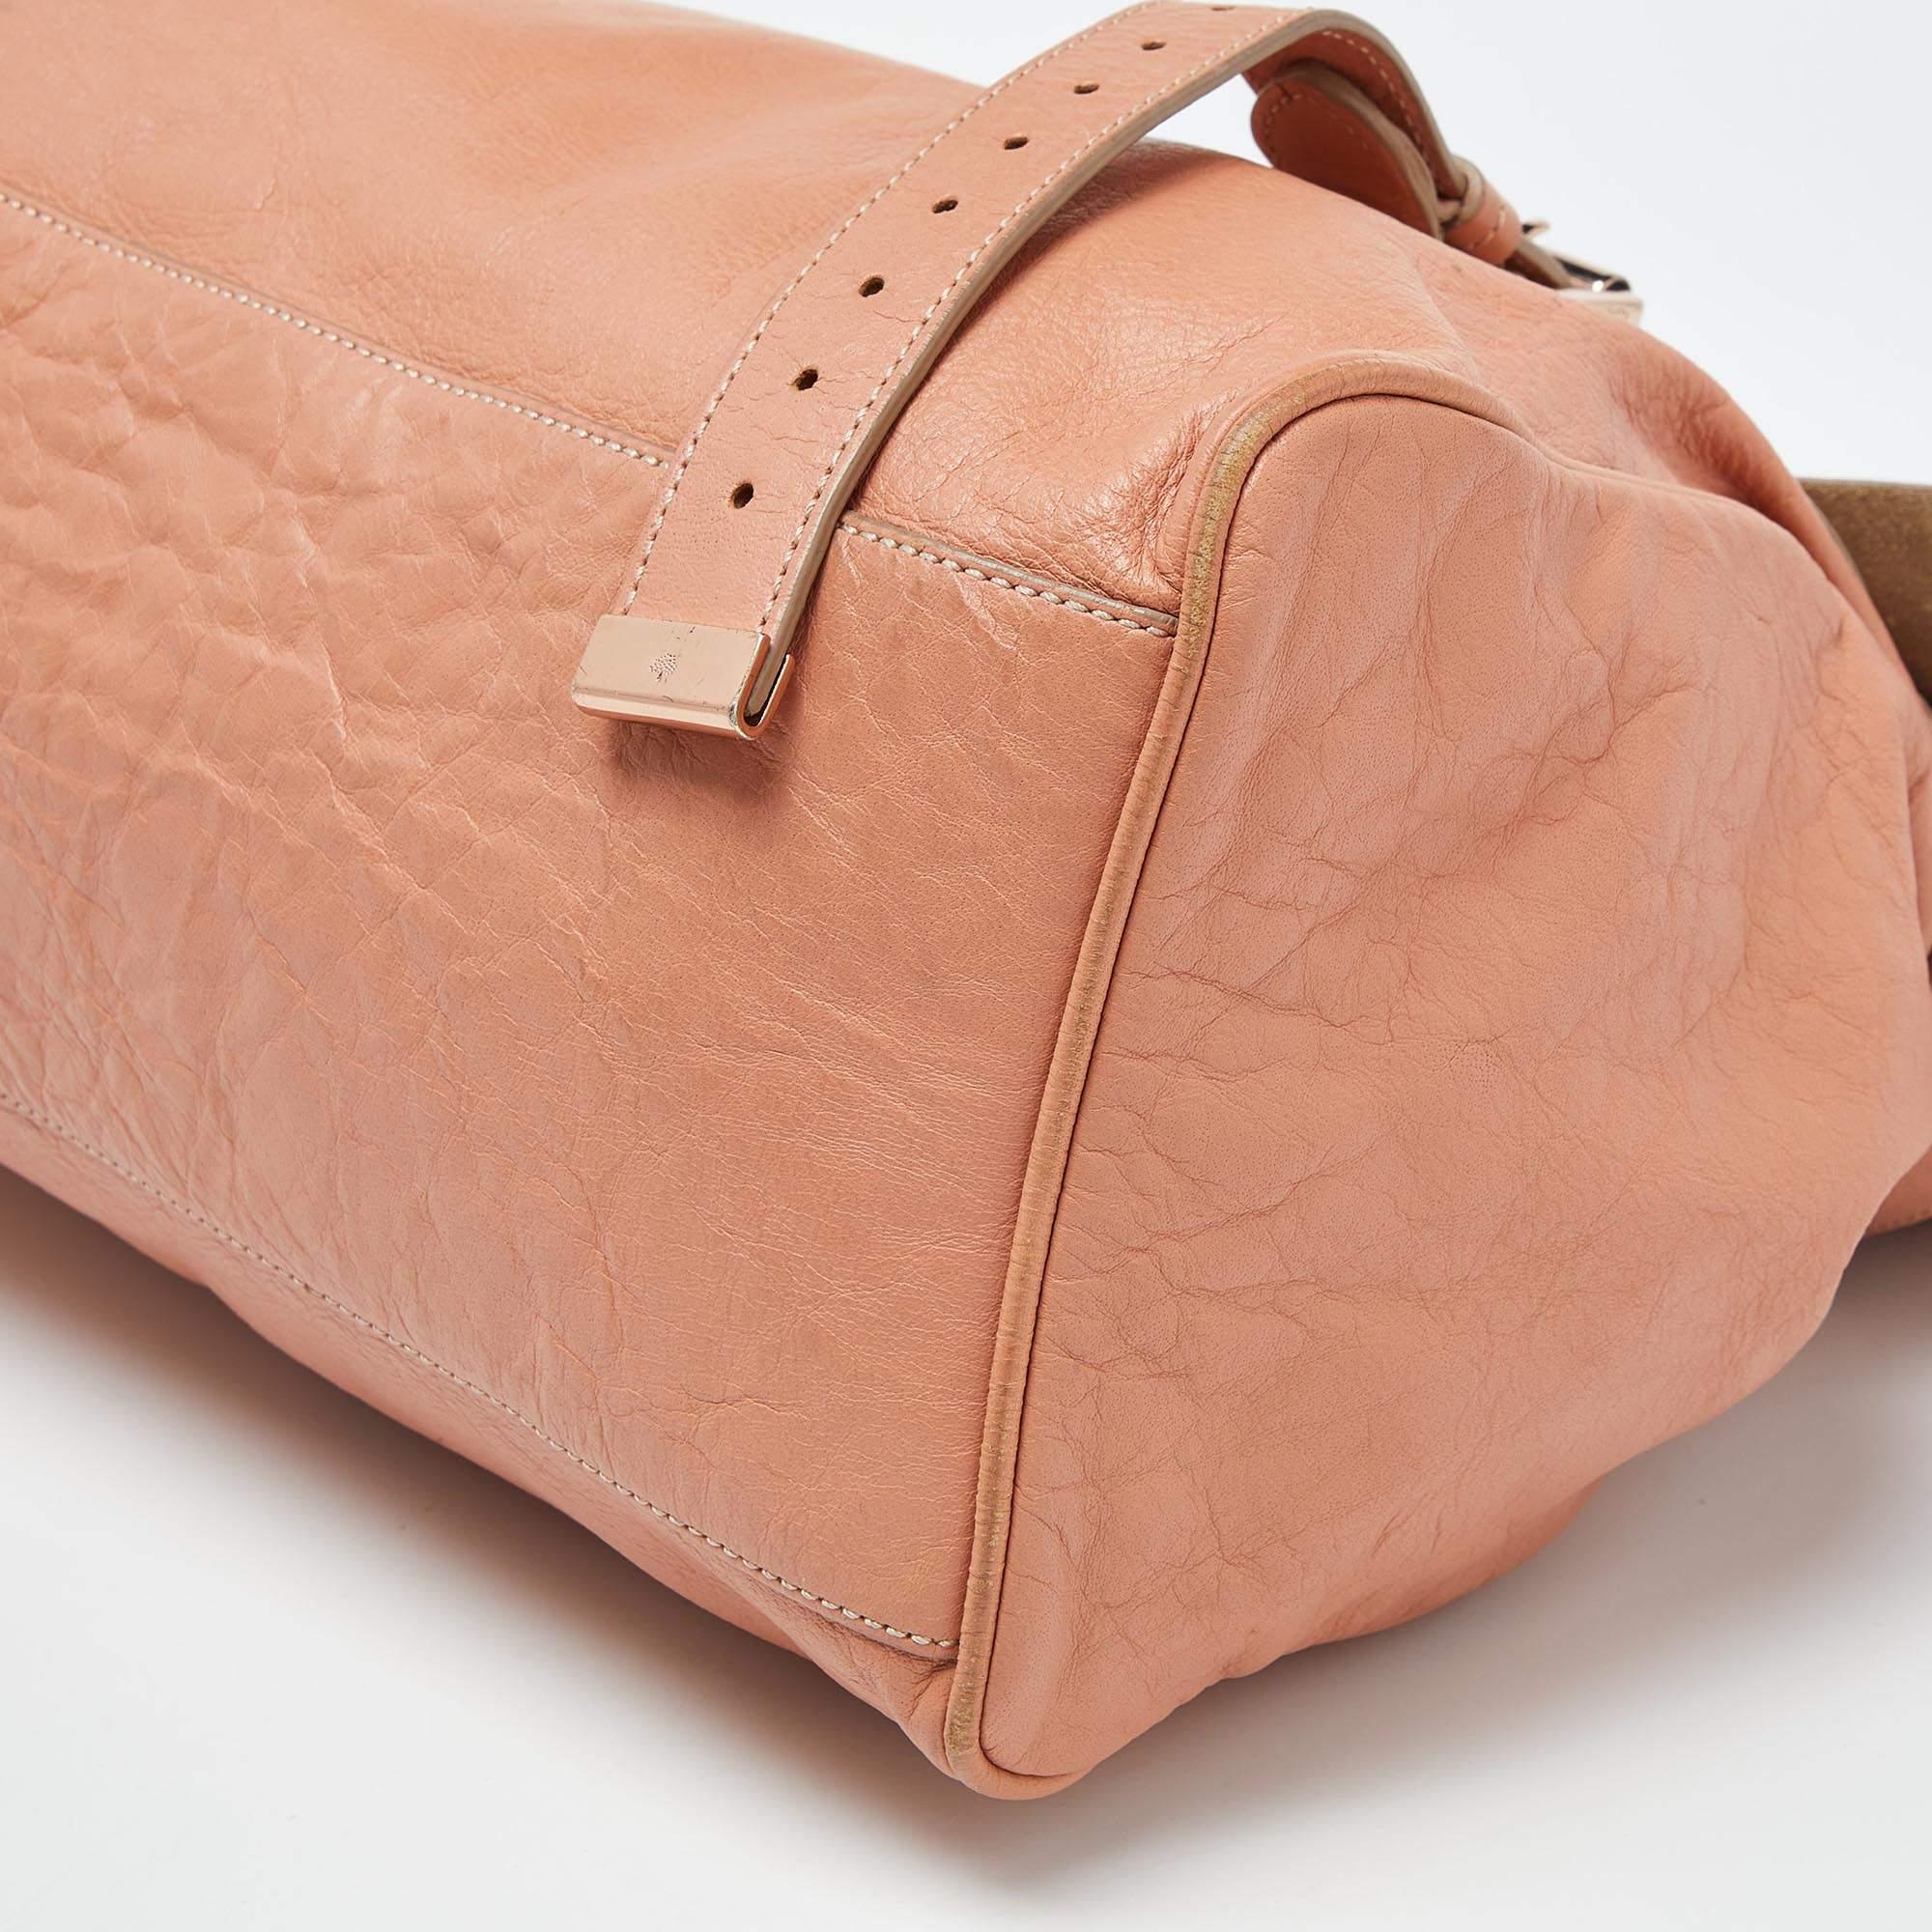 Mulberry Peach Leather Oversized Alexa Satchel For Sale 5